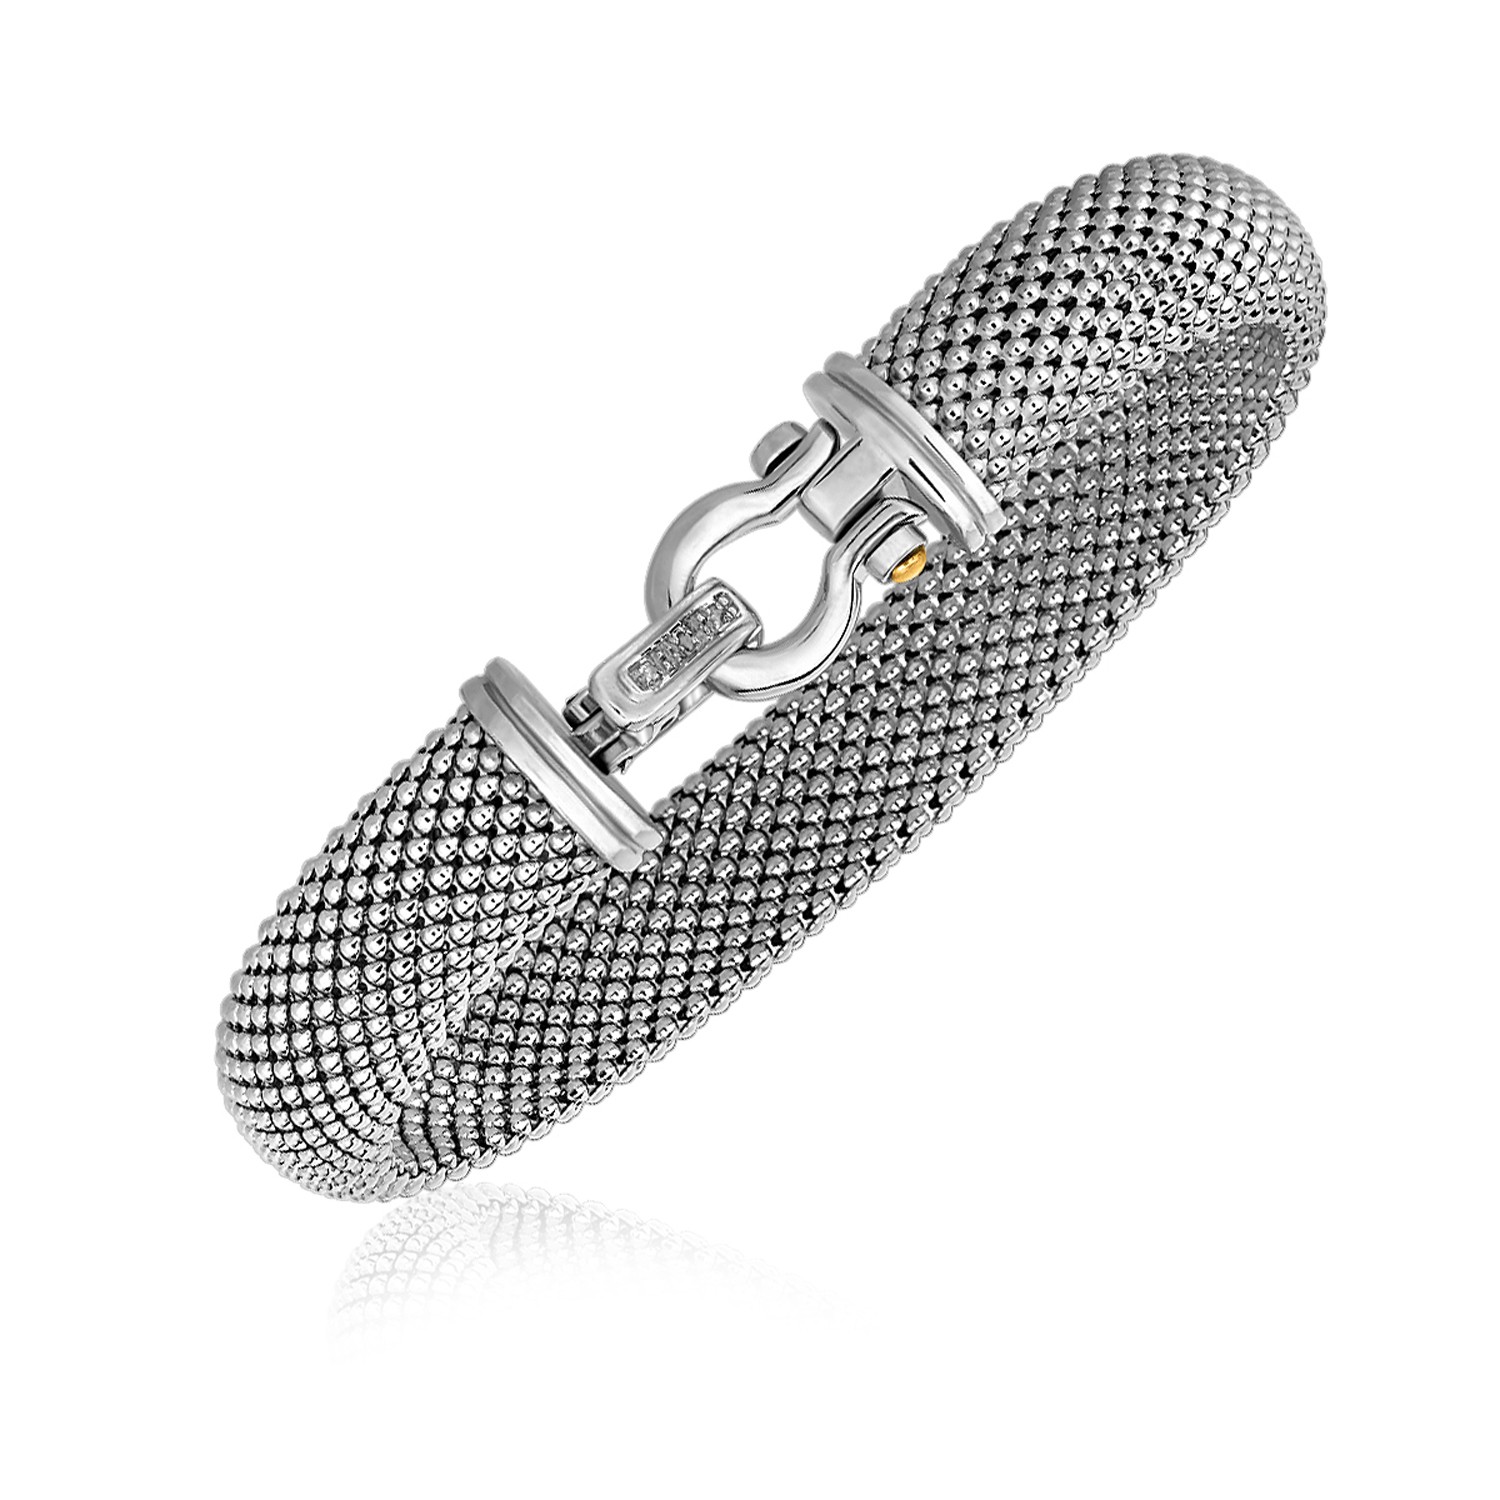 Fashion Accessories Stainless Steel Tennis Bracelet for Women  China  Tennis Bracelet and Tennis Bracelets price  MadeinChinacom